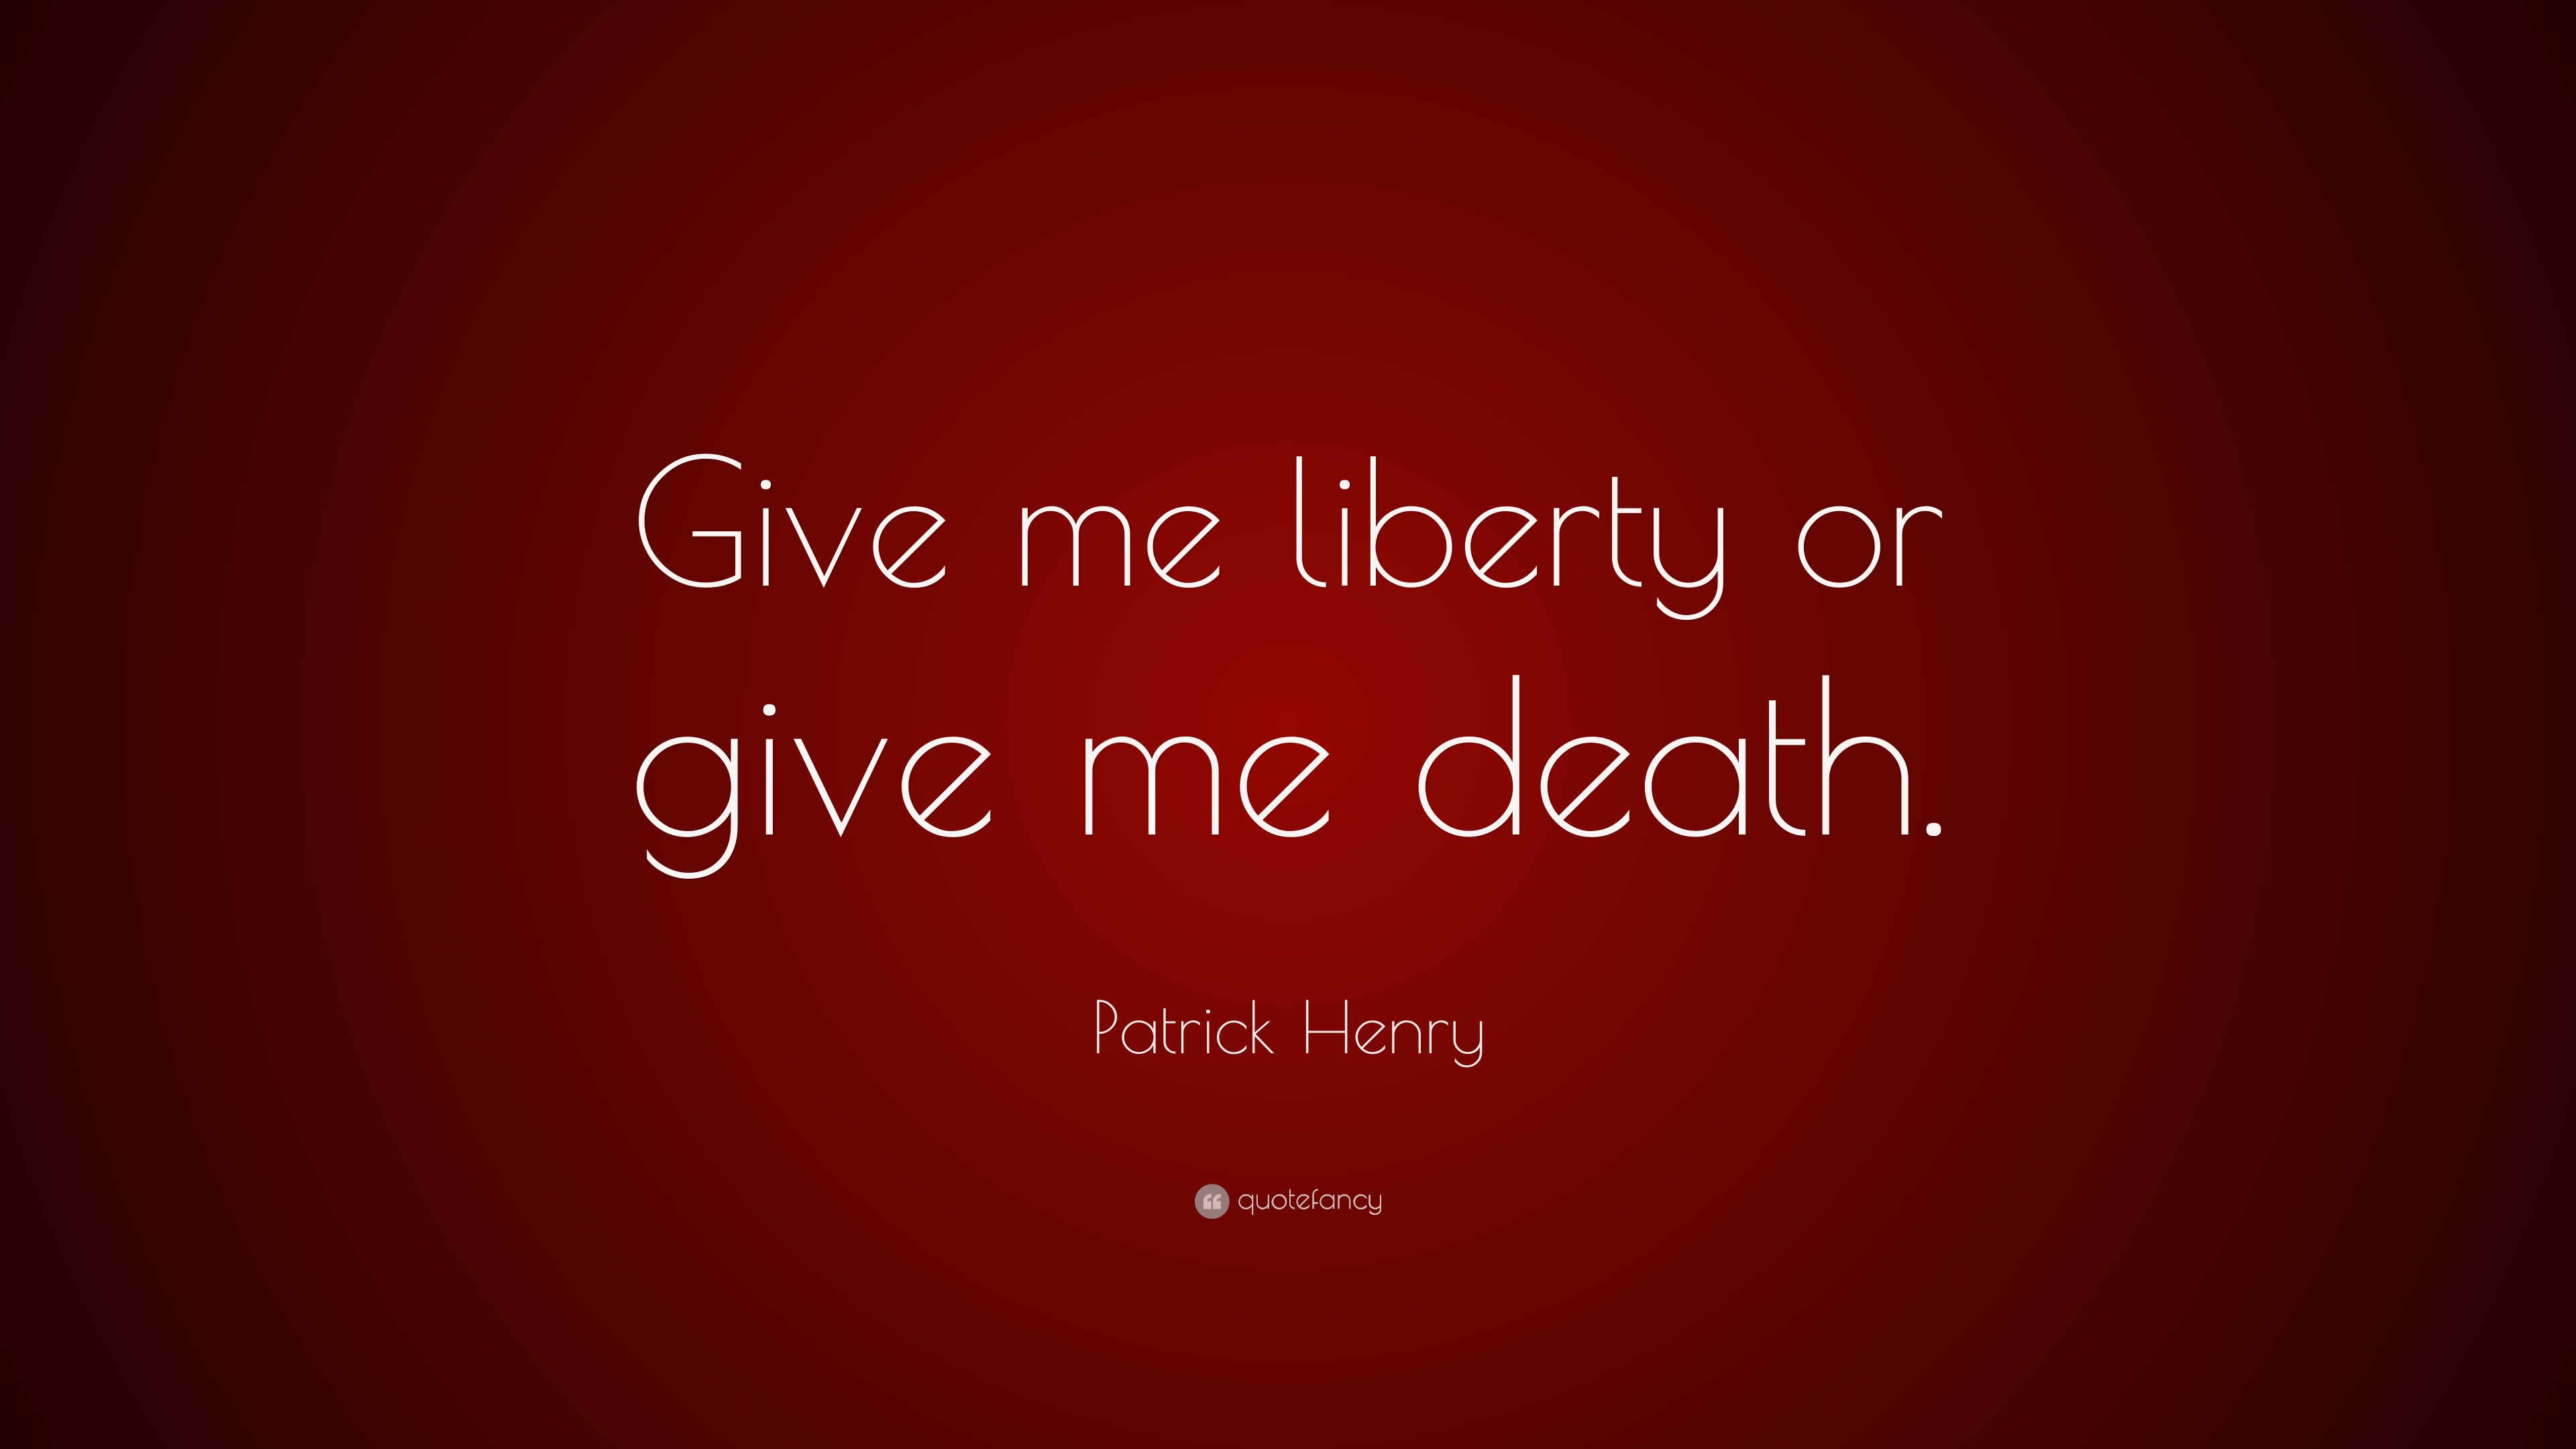 Patrick Henry Quote: “Give me liberty or give me death.”